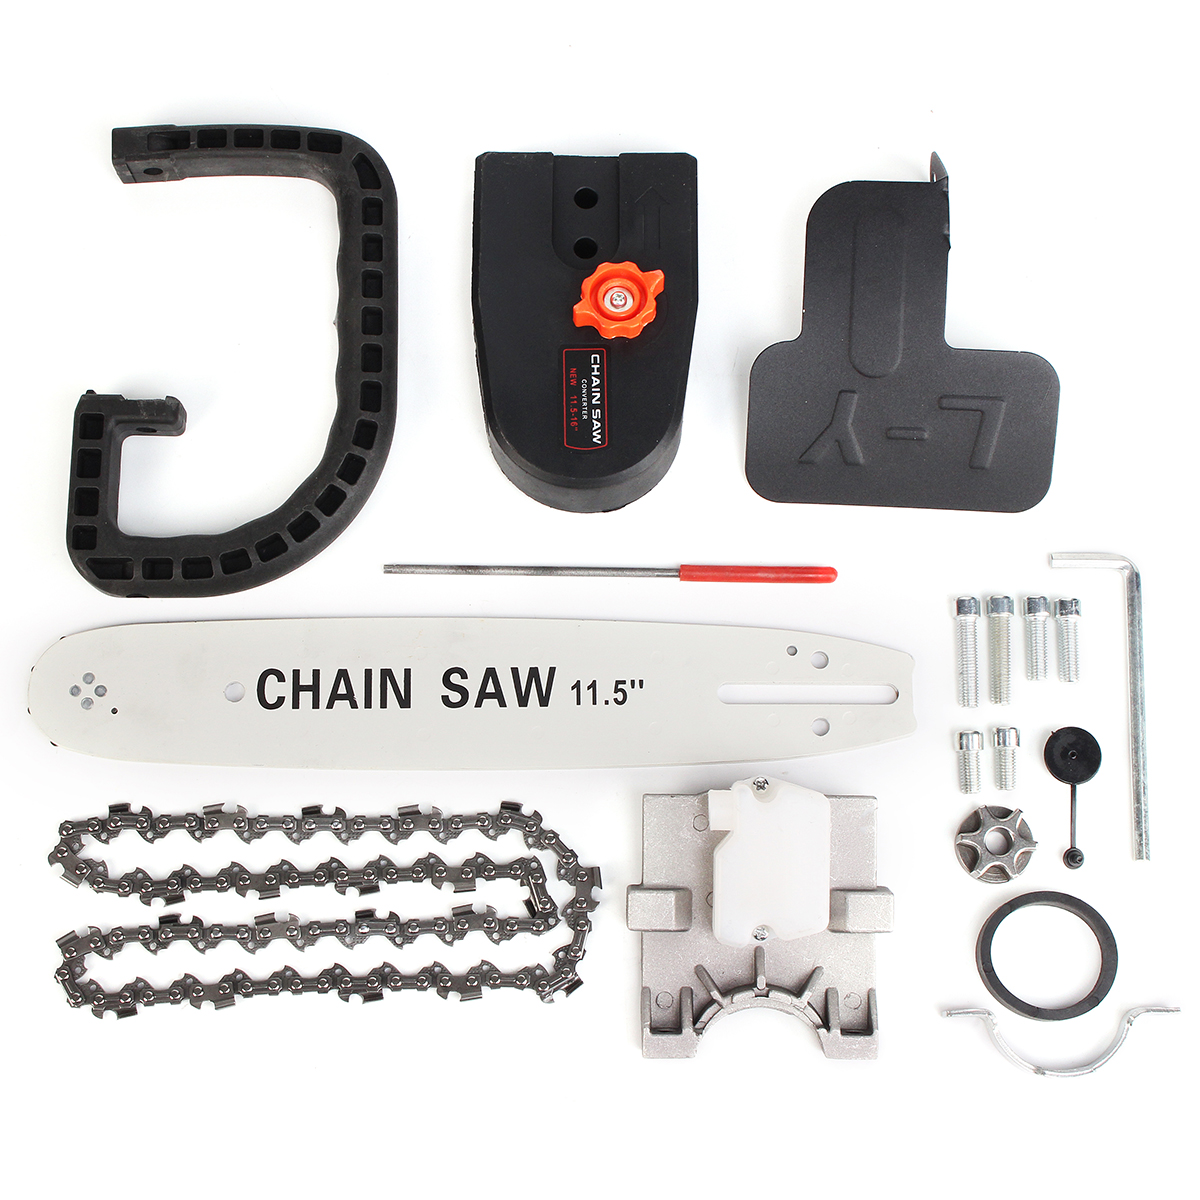 

11.5 Inch Woodworking Chainsaw Refit Kit Saw Chain Bracket with File for Woodworking